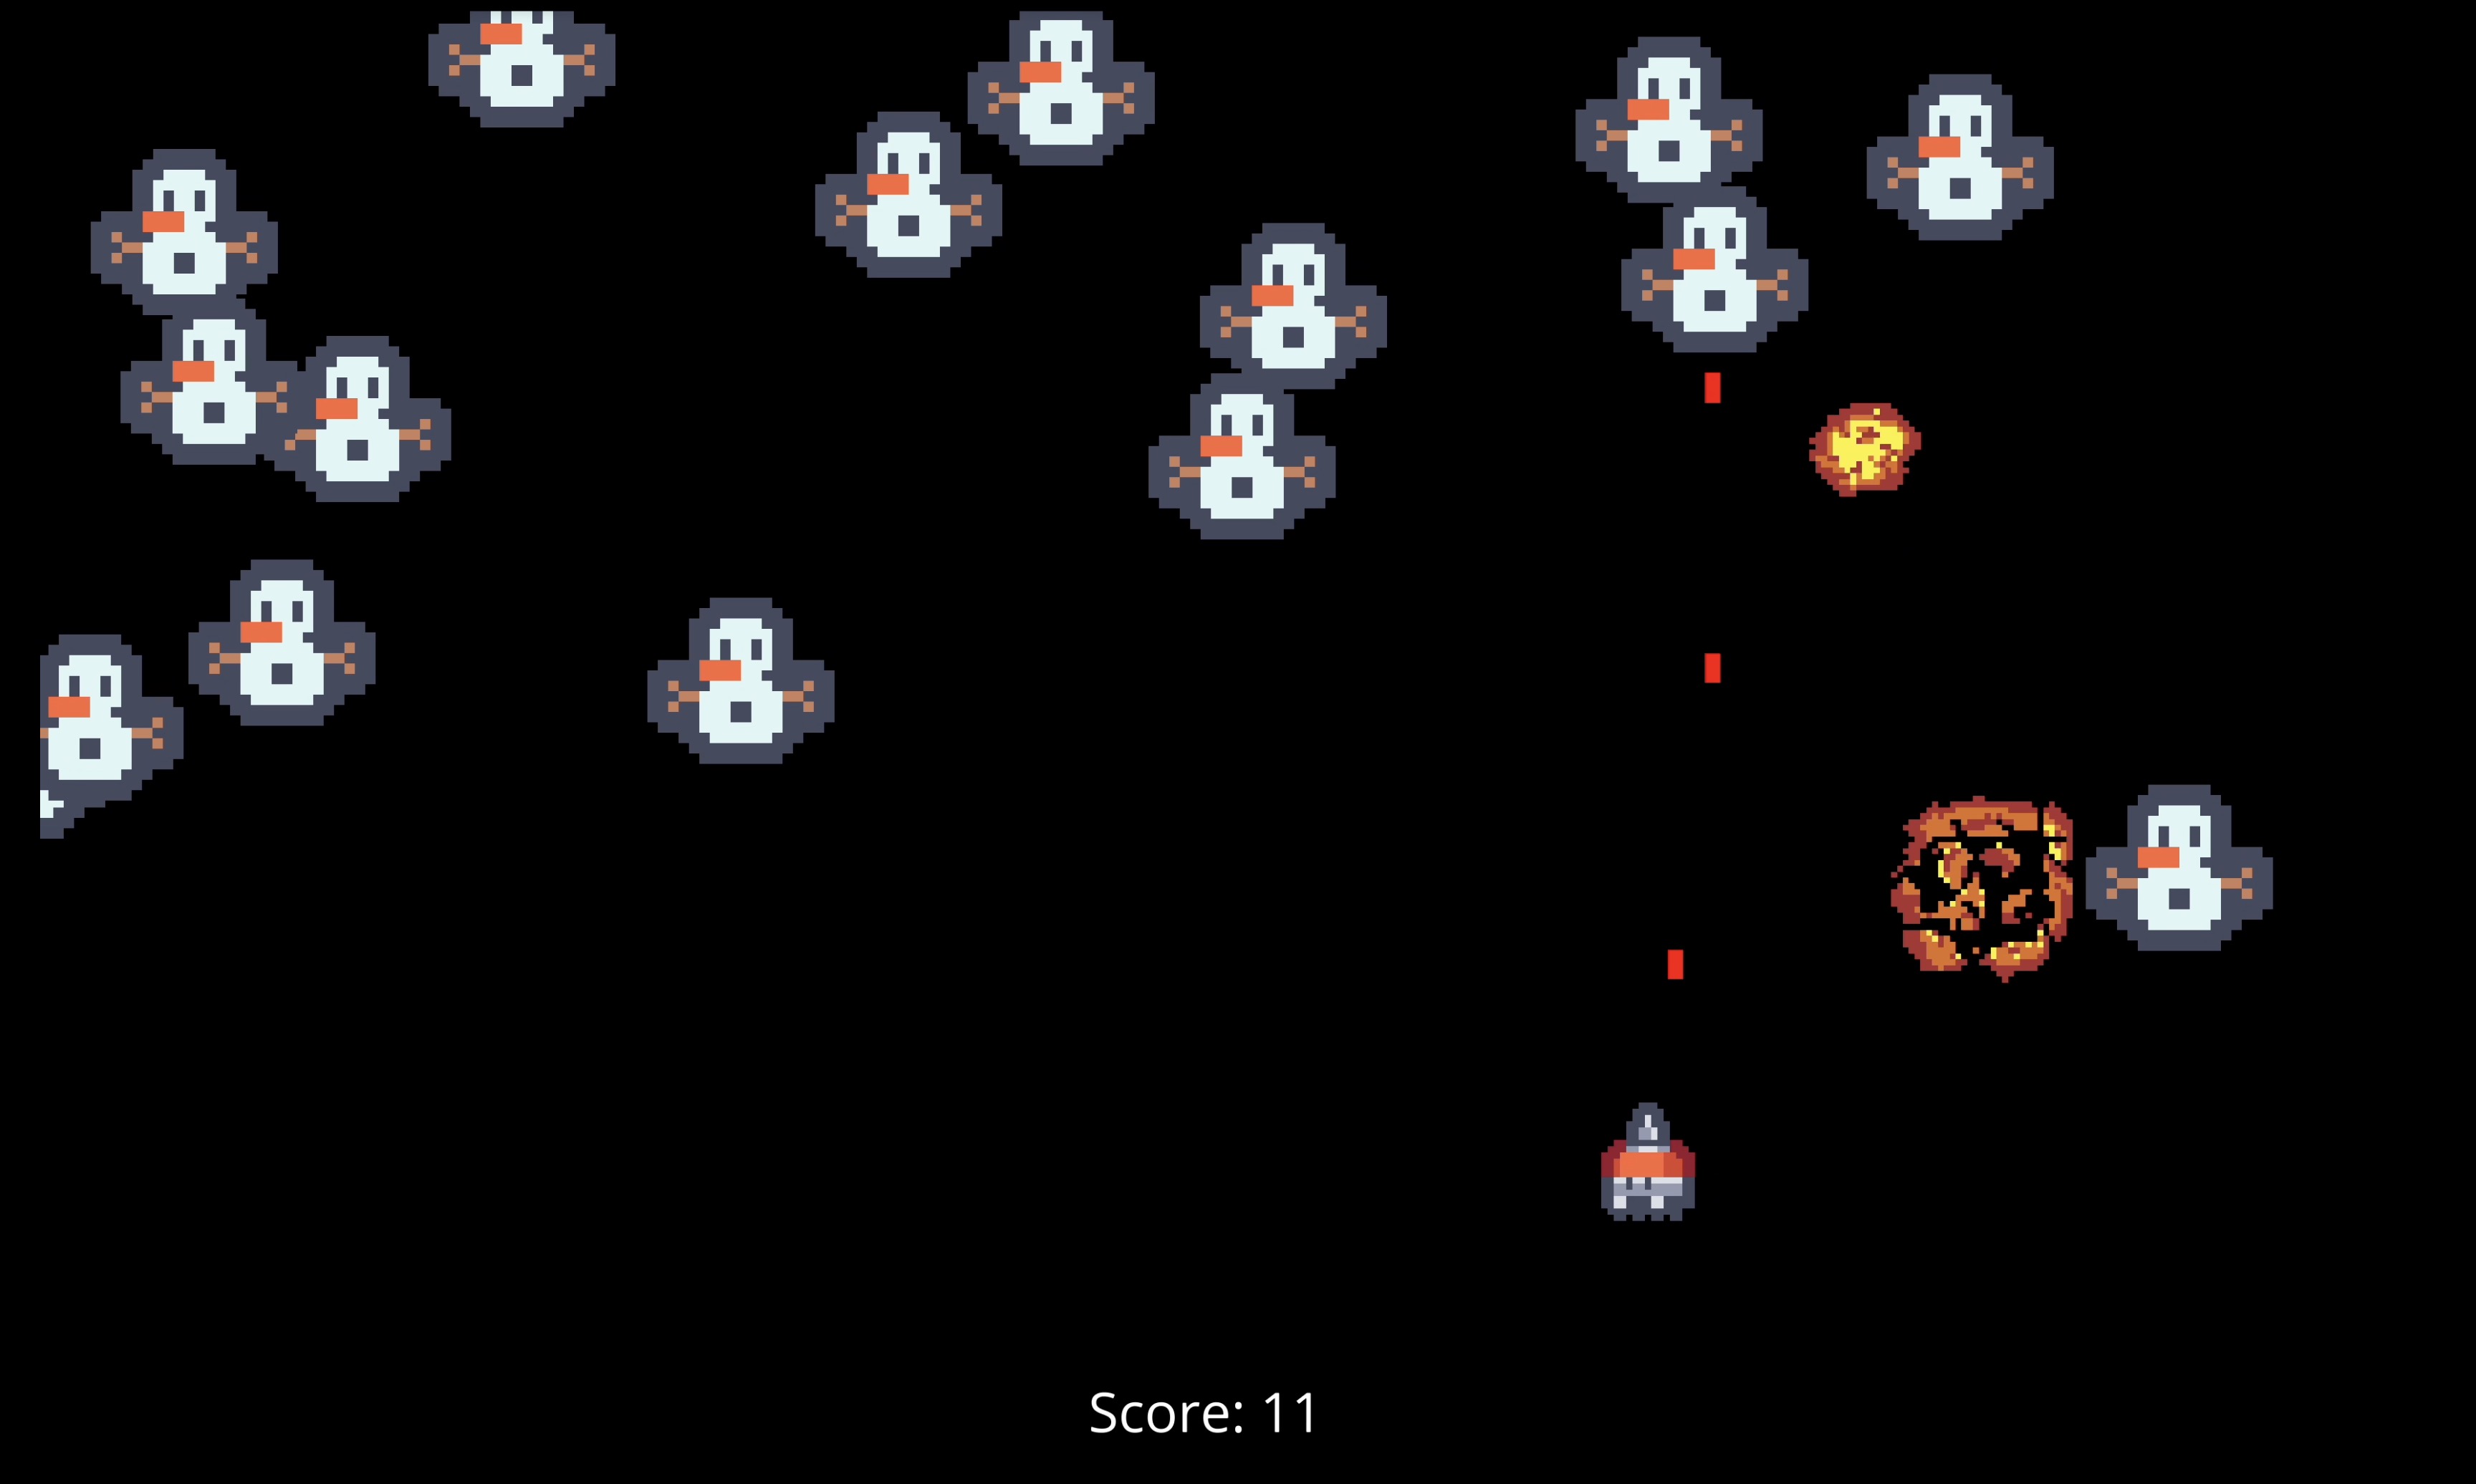 Screenshot from test game SpaceInvaders